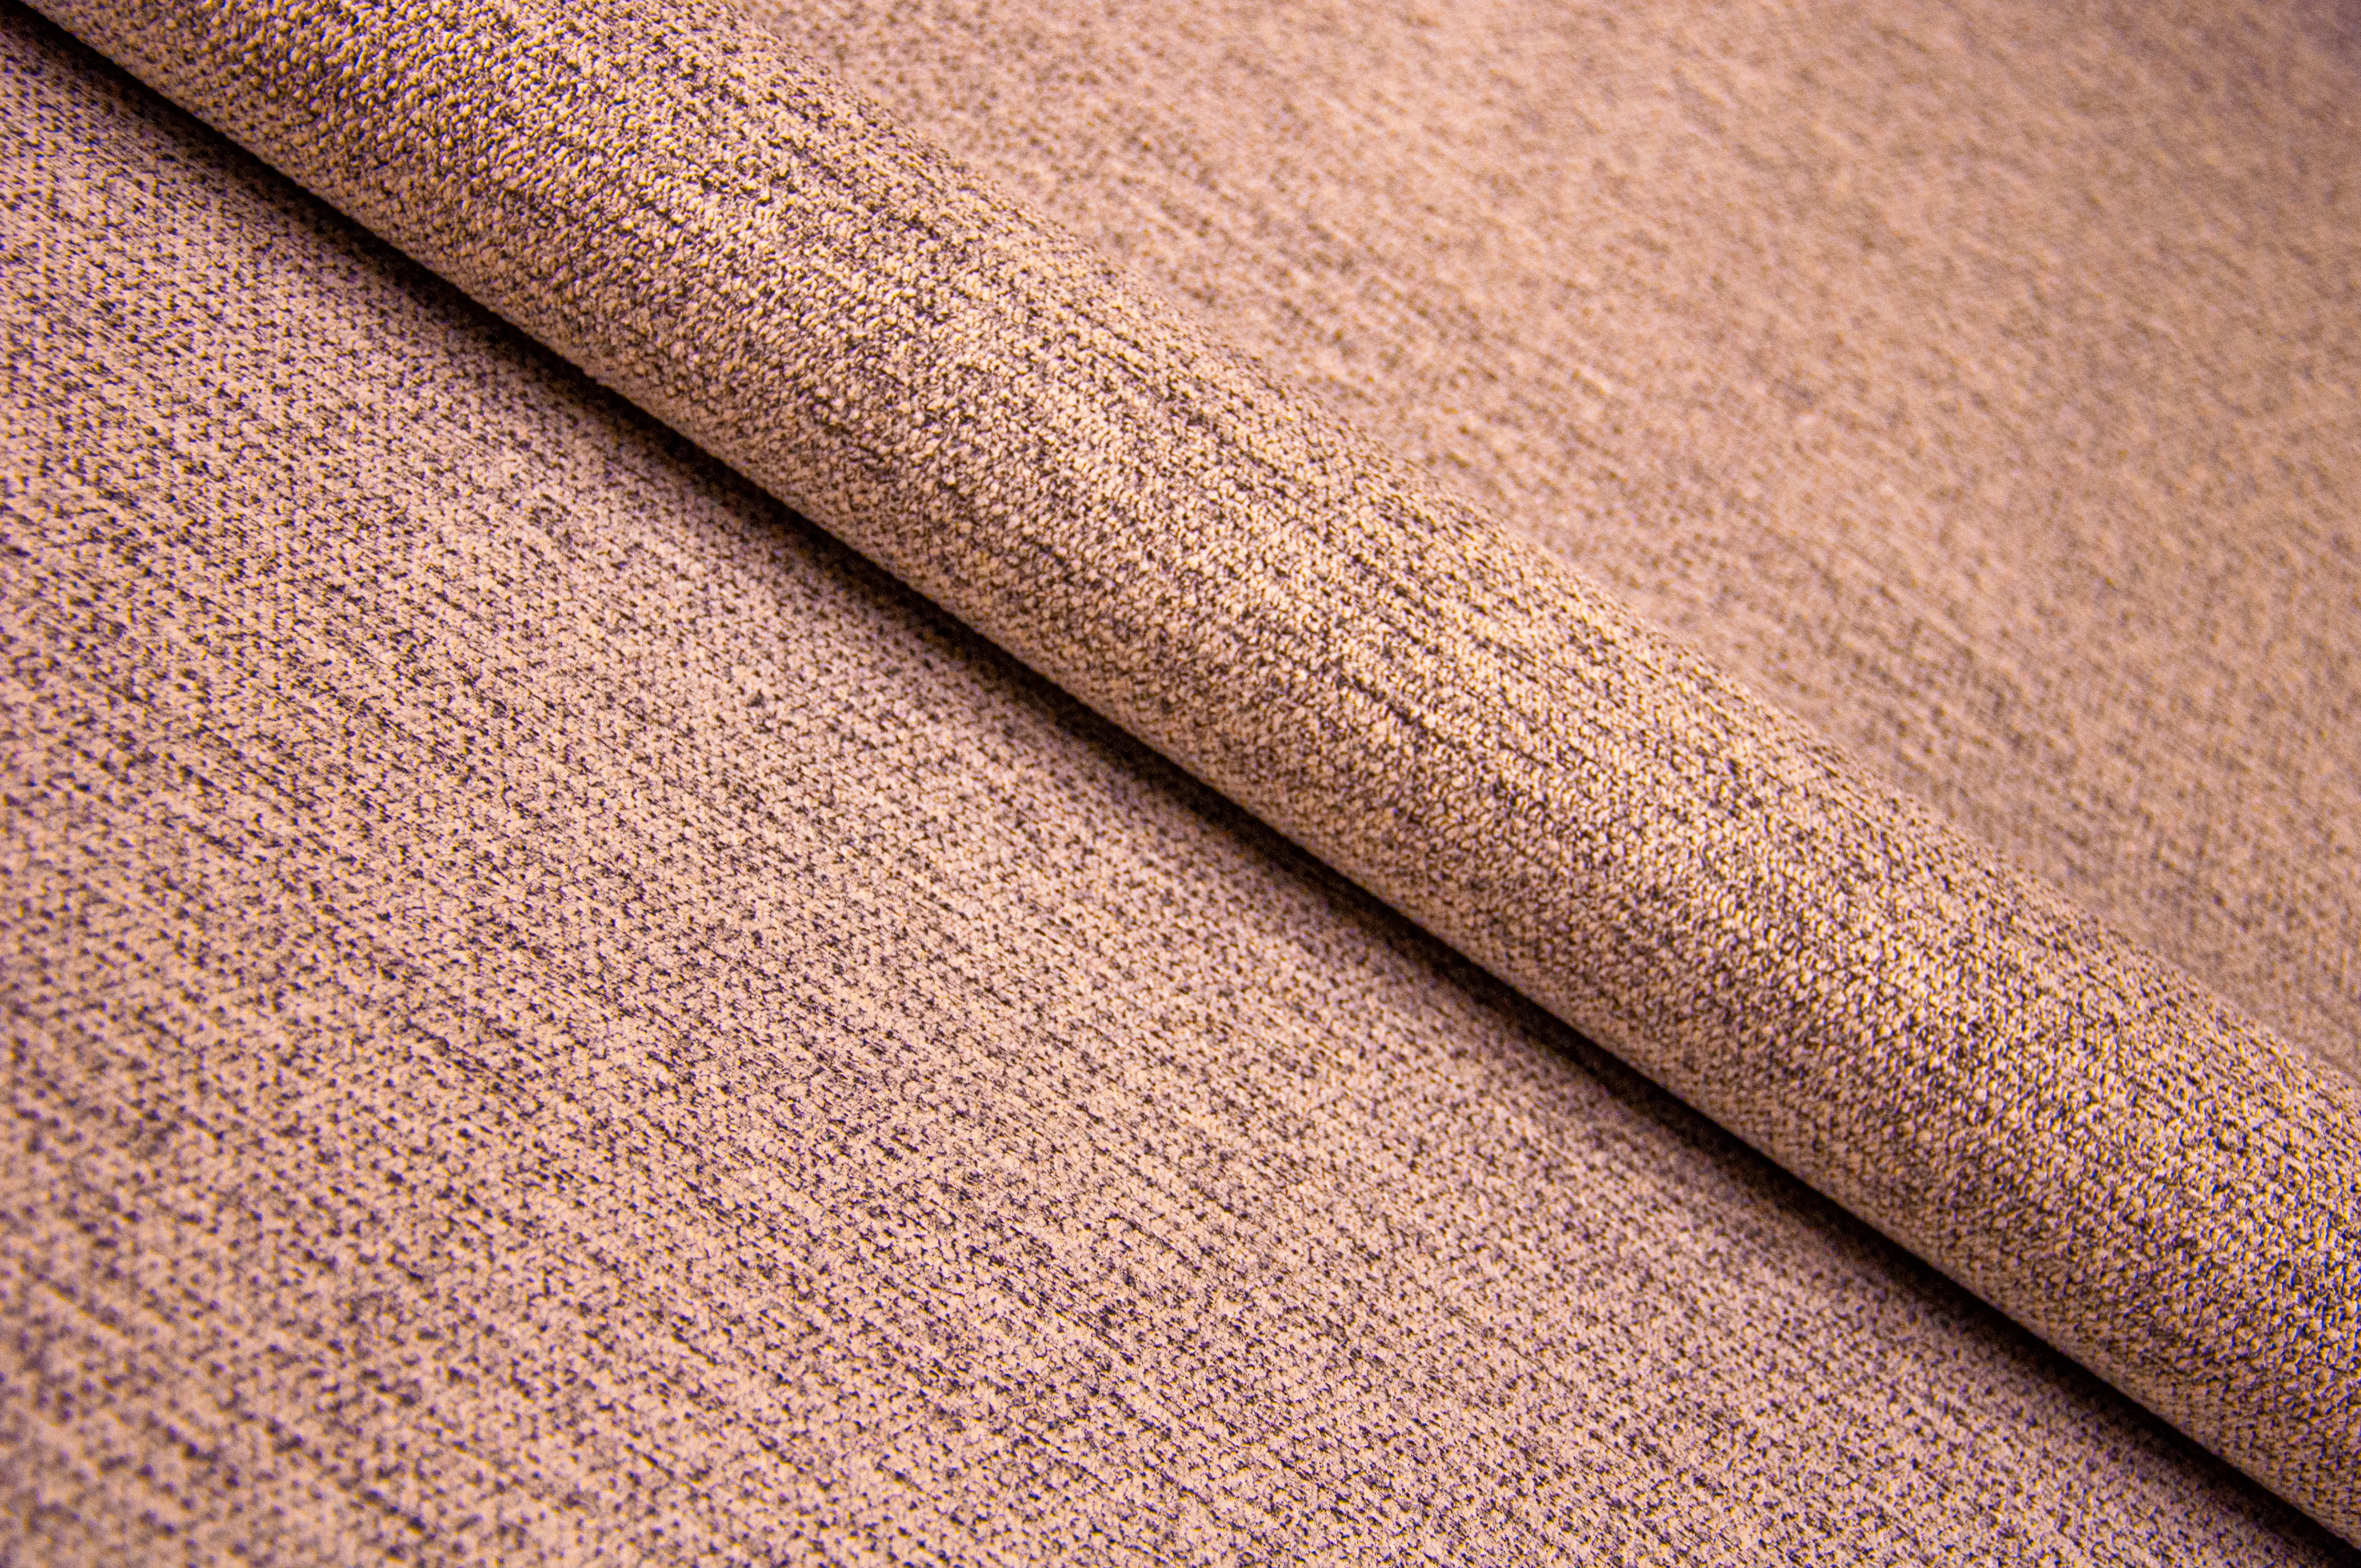 Upholstery fabric